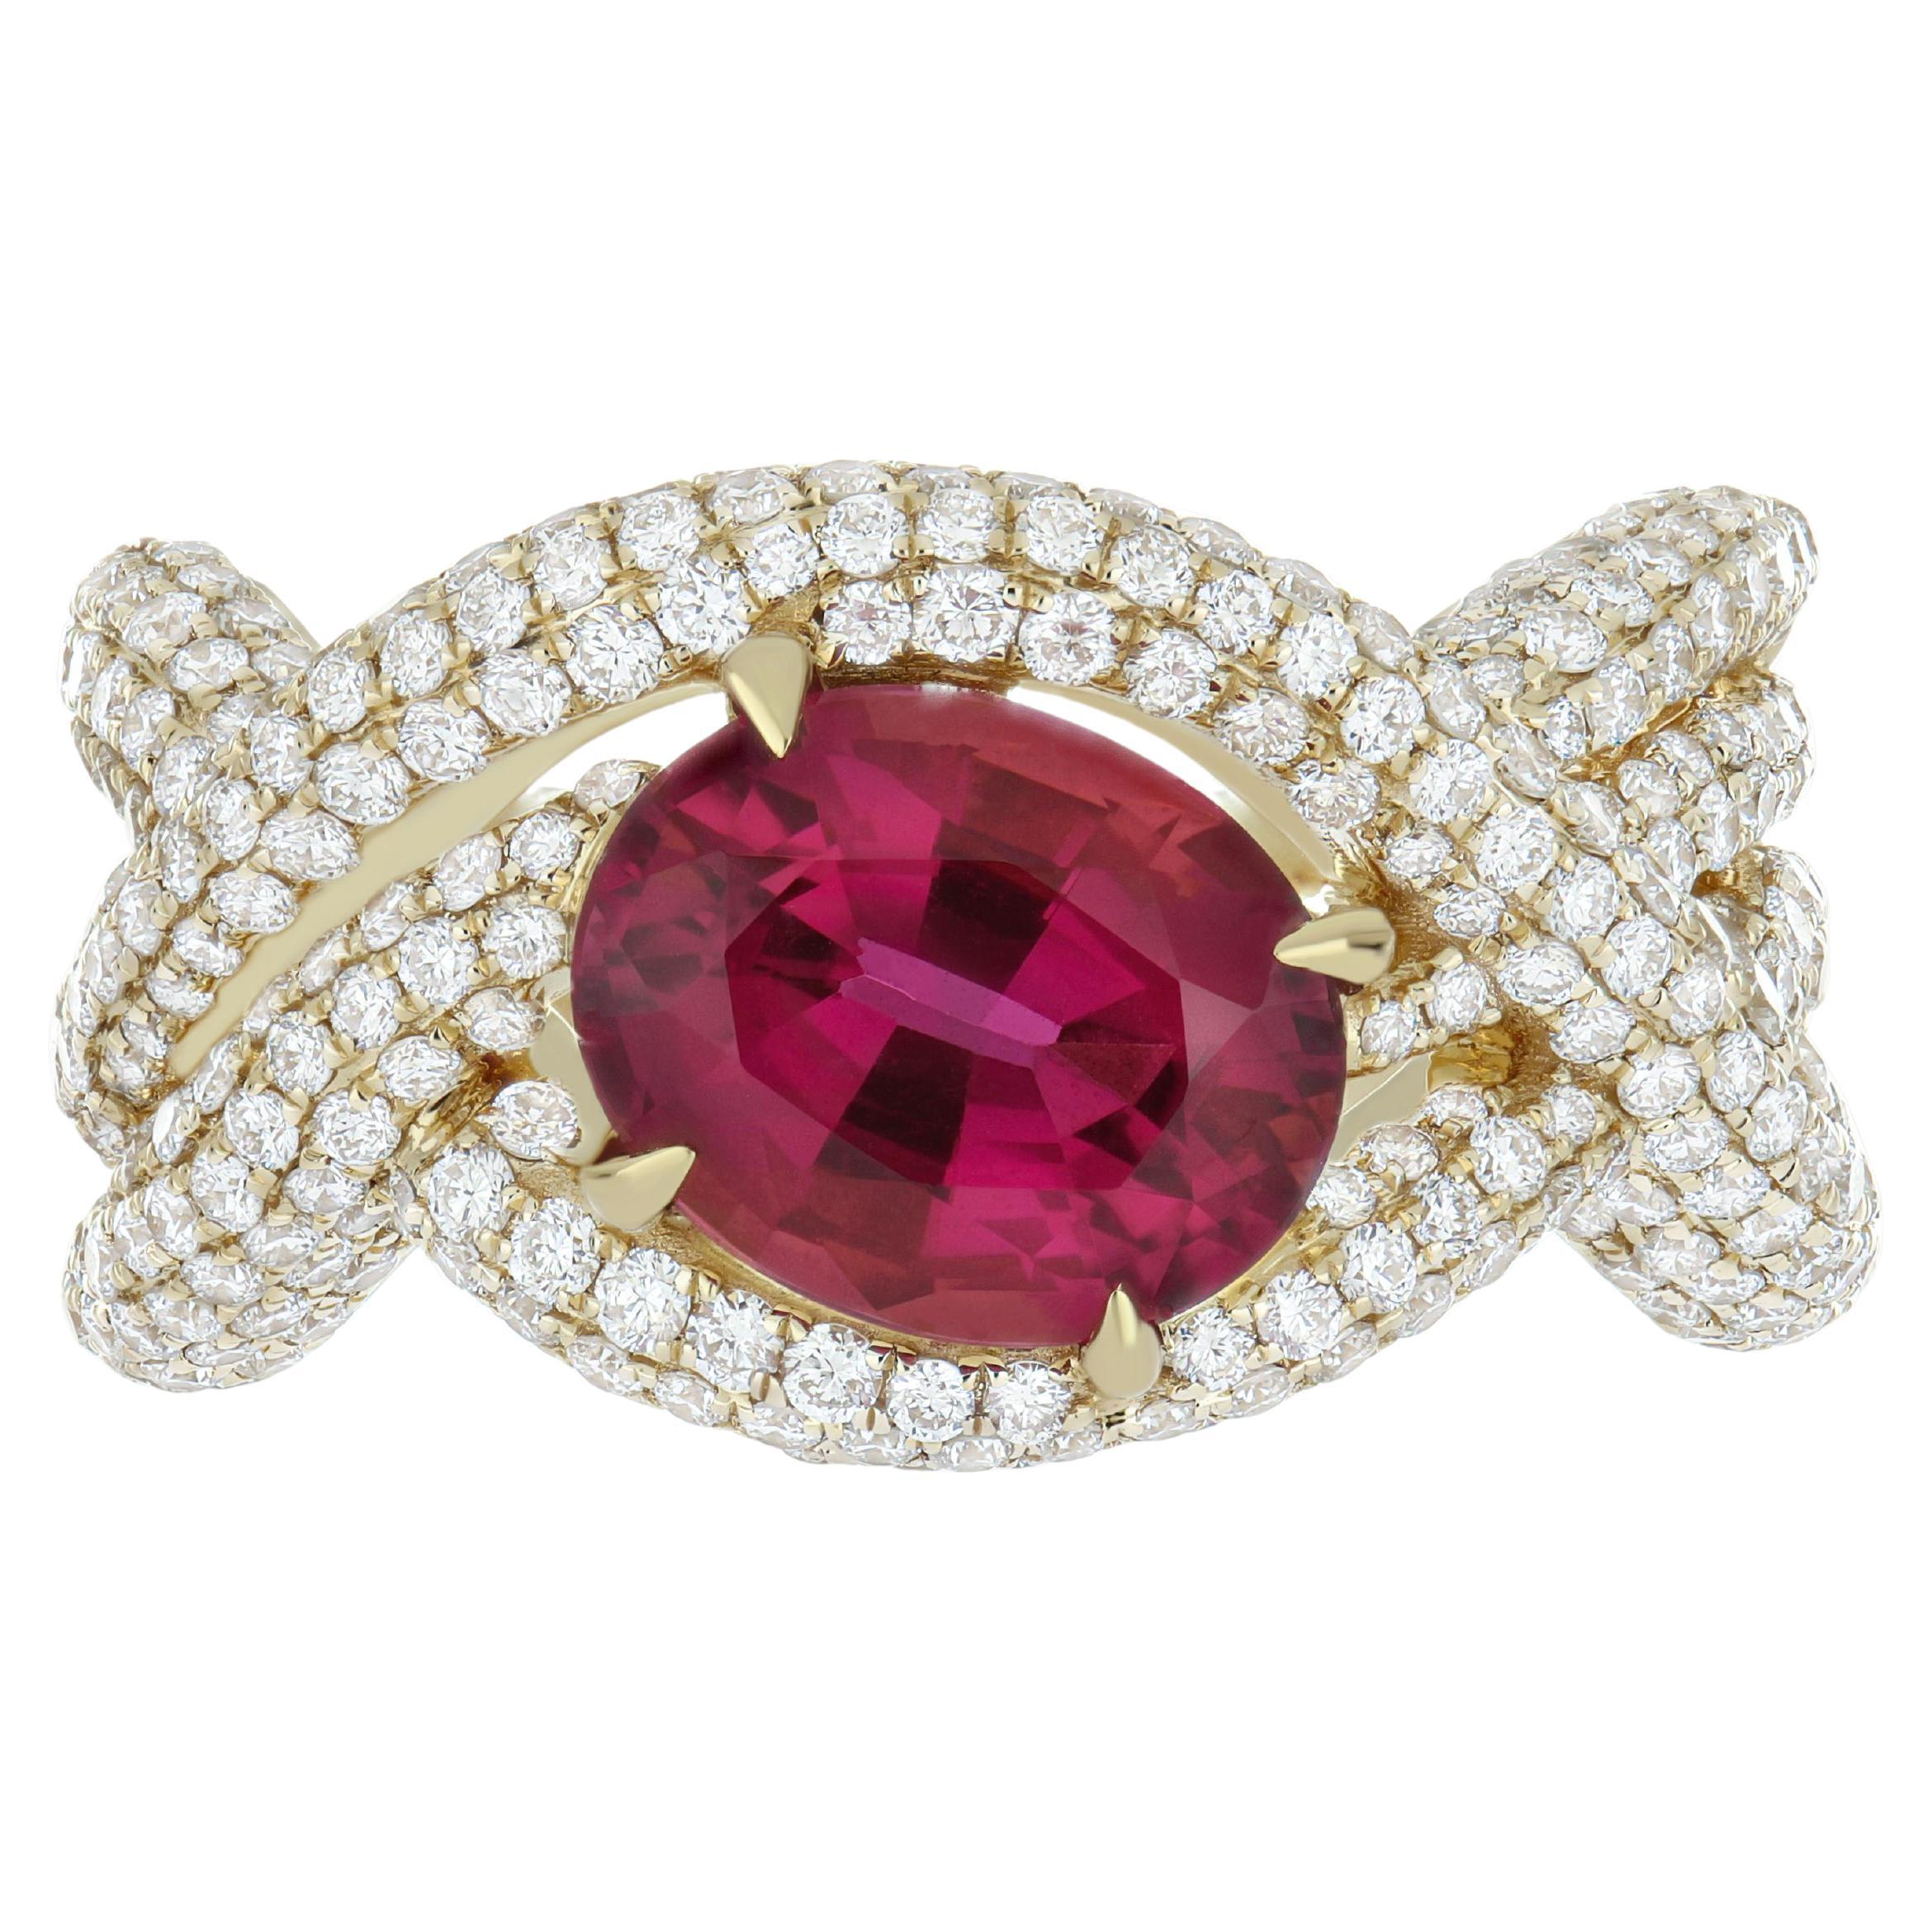 2.85 CT's Rubellite & Diamond Ring in 18 karat Yellow Gold Hand-crafted Ring